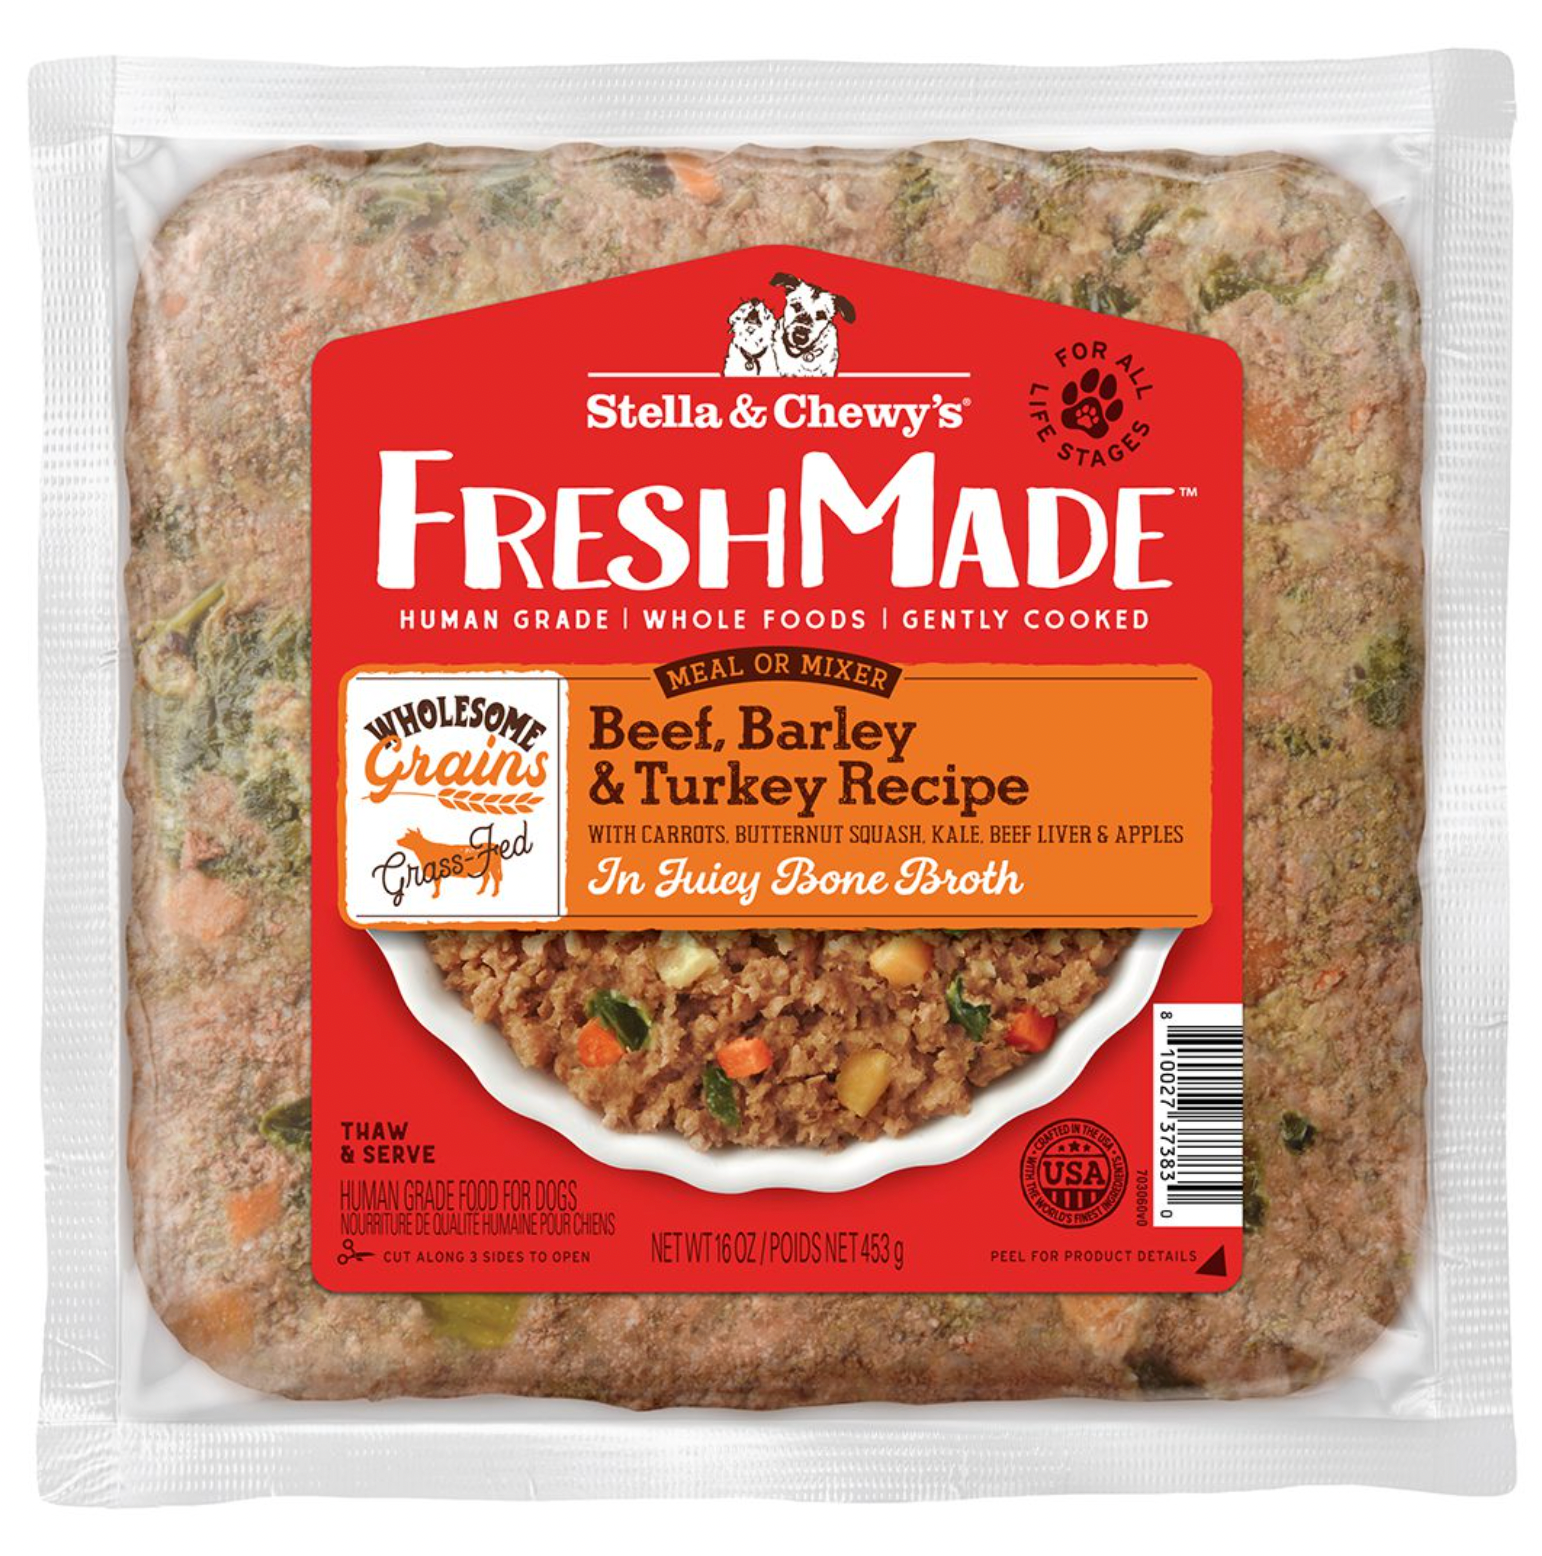 Stella & Chewy's Fresh Made Gently Cooked Frozen Dog Food - Beef, Barley & Turkey